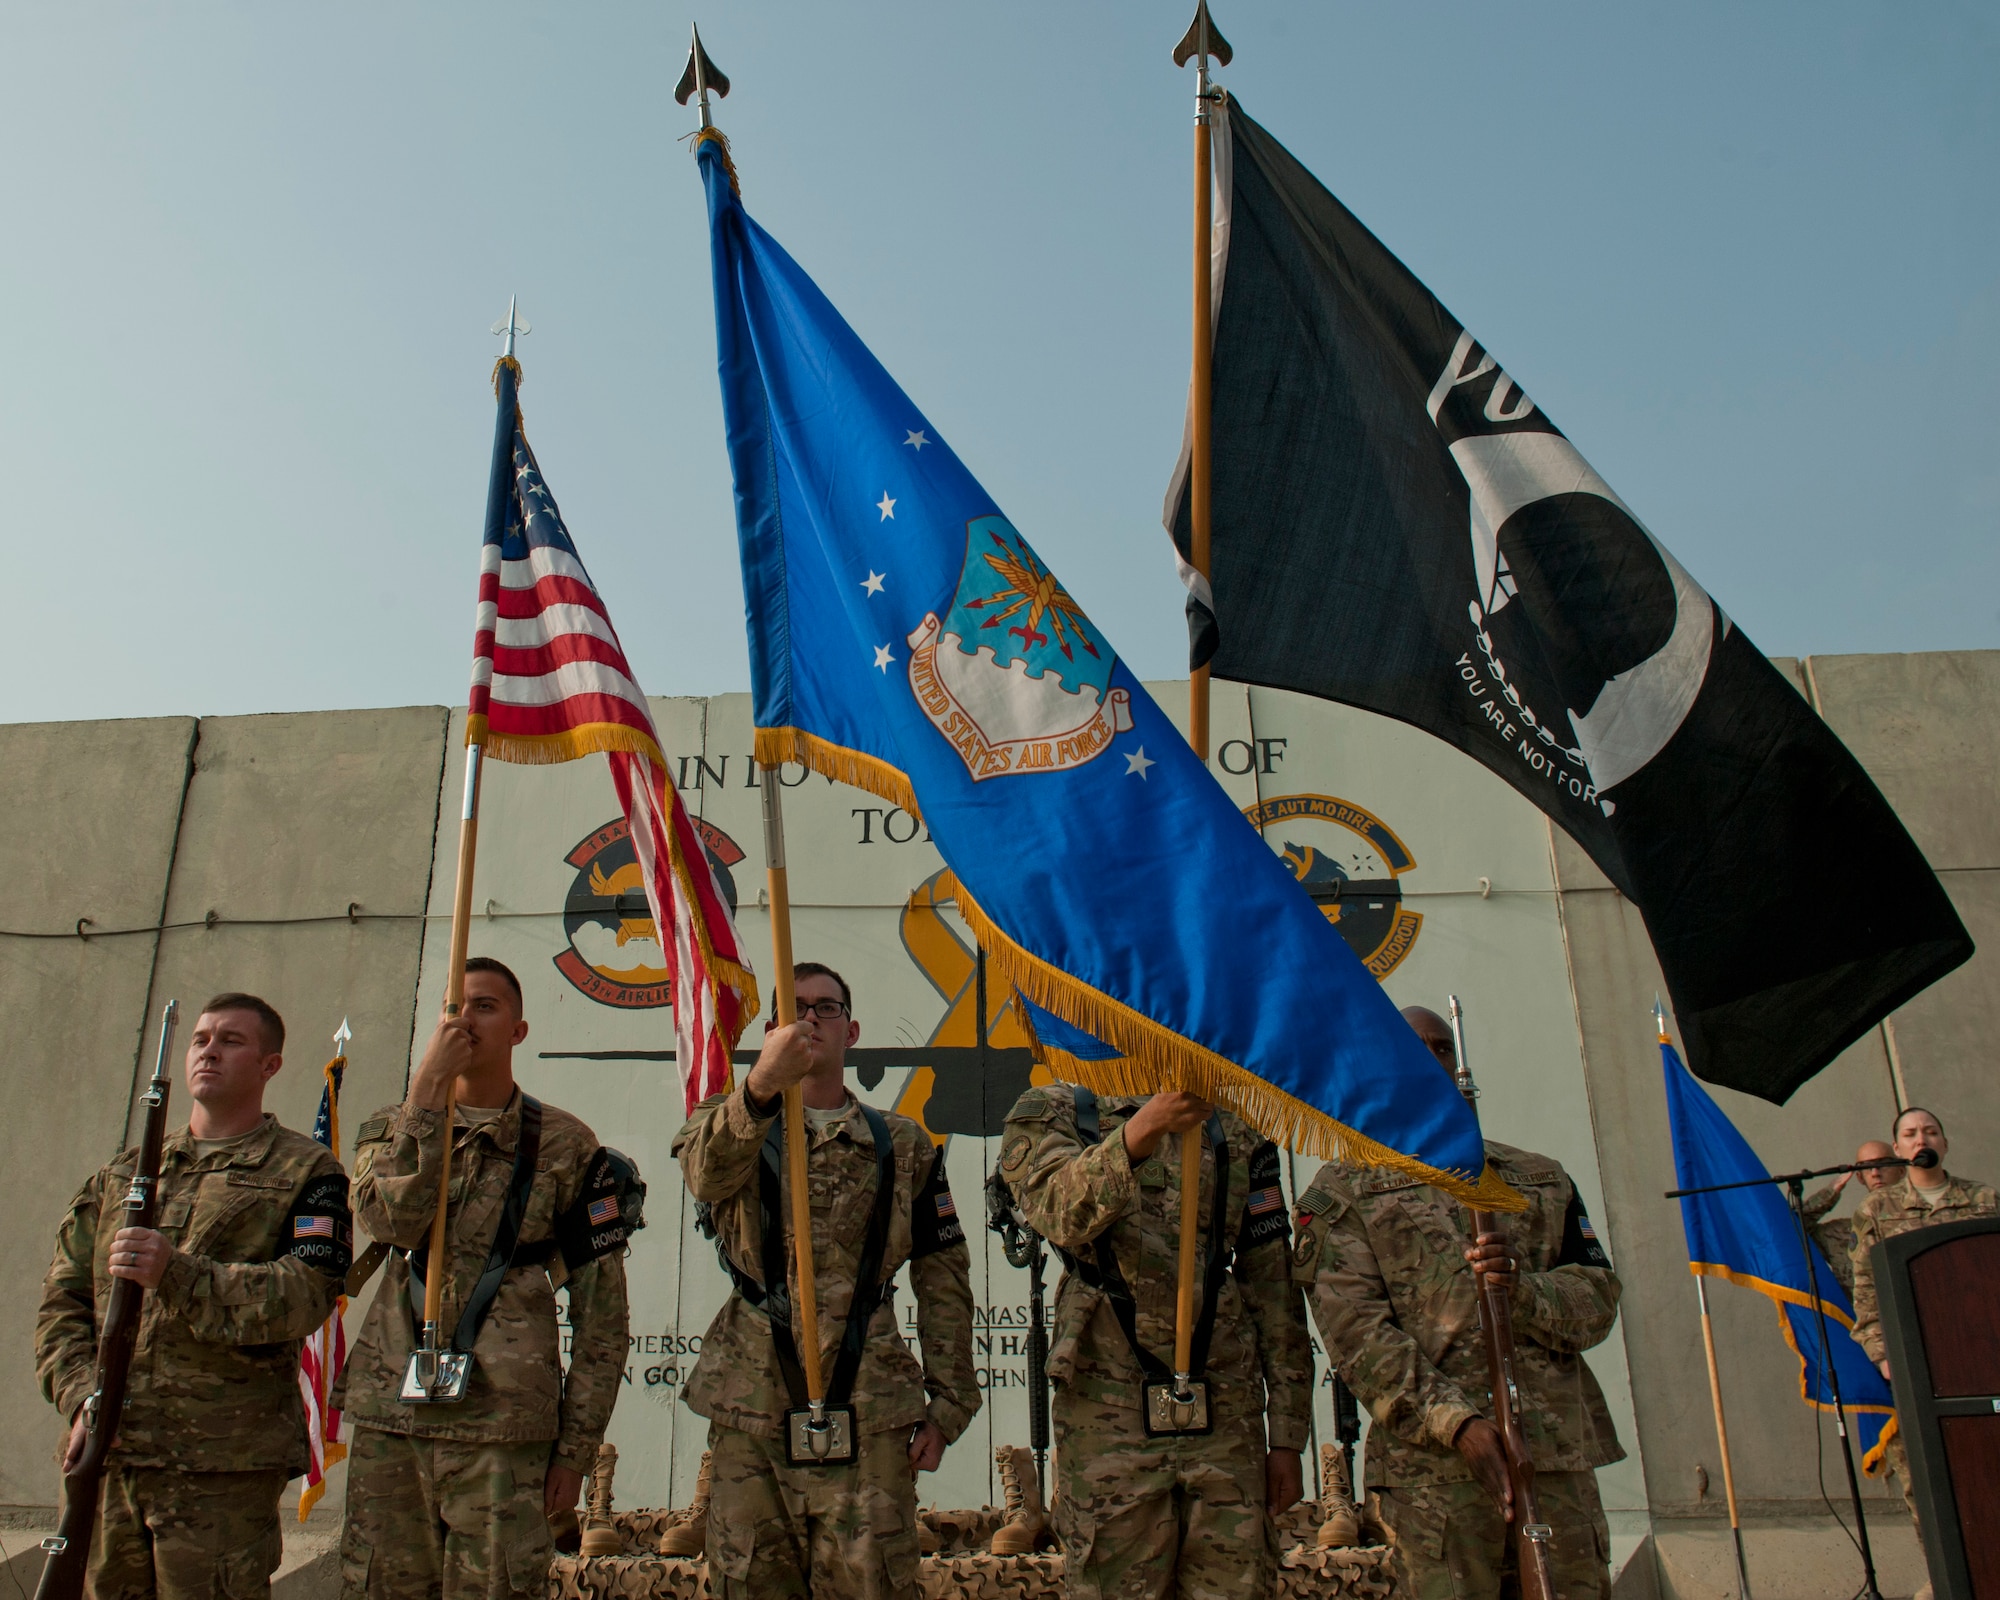 The 455th Air Expeditionary Wing Honor Guard presents the colors during a remembrance ceremony for those Airmen lost when TORQE 62 crashed, Bagram Airfield, Afghanistan, Oct. 2, 2016. TORQE 62 crashed during takeoff at Jalalabad Airfield, Afghanistan resulting in the loss of six Airmen and five contractors. (U.S. Air Force photo by Capt. Korey Fratini)